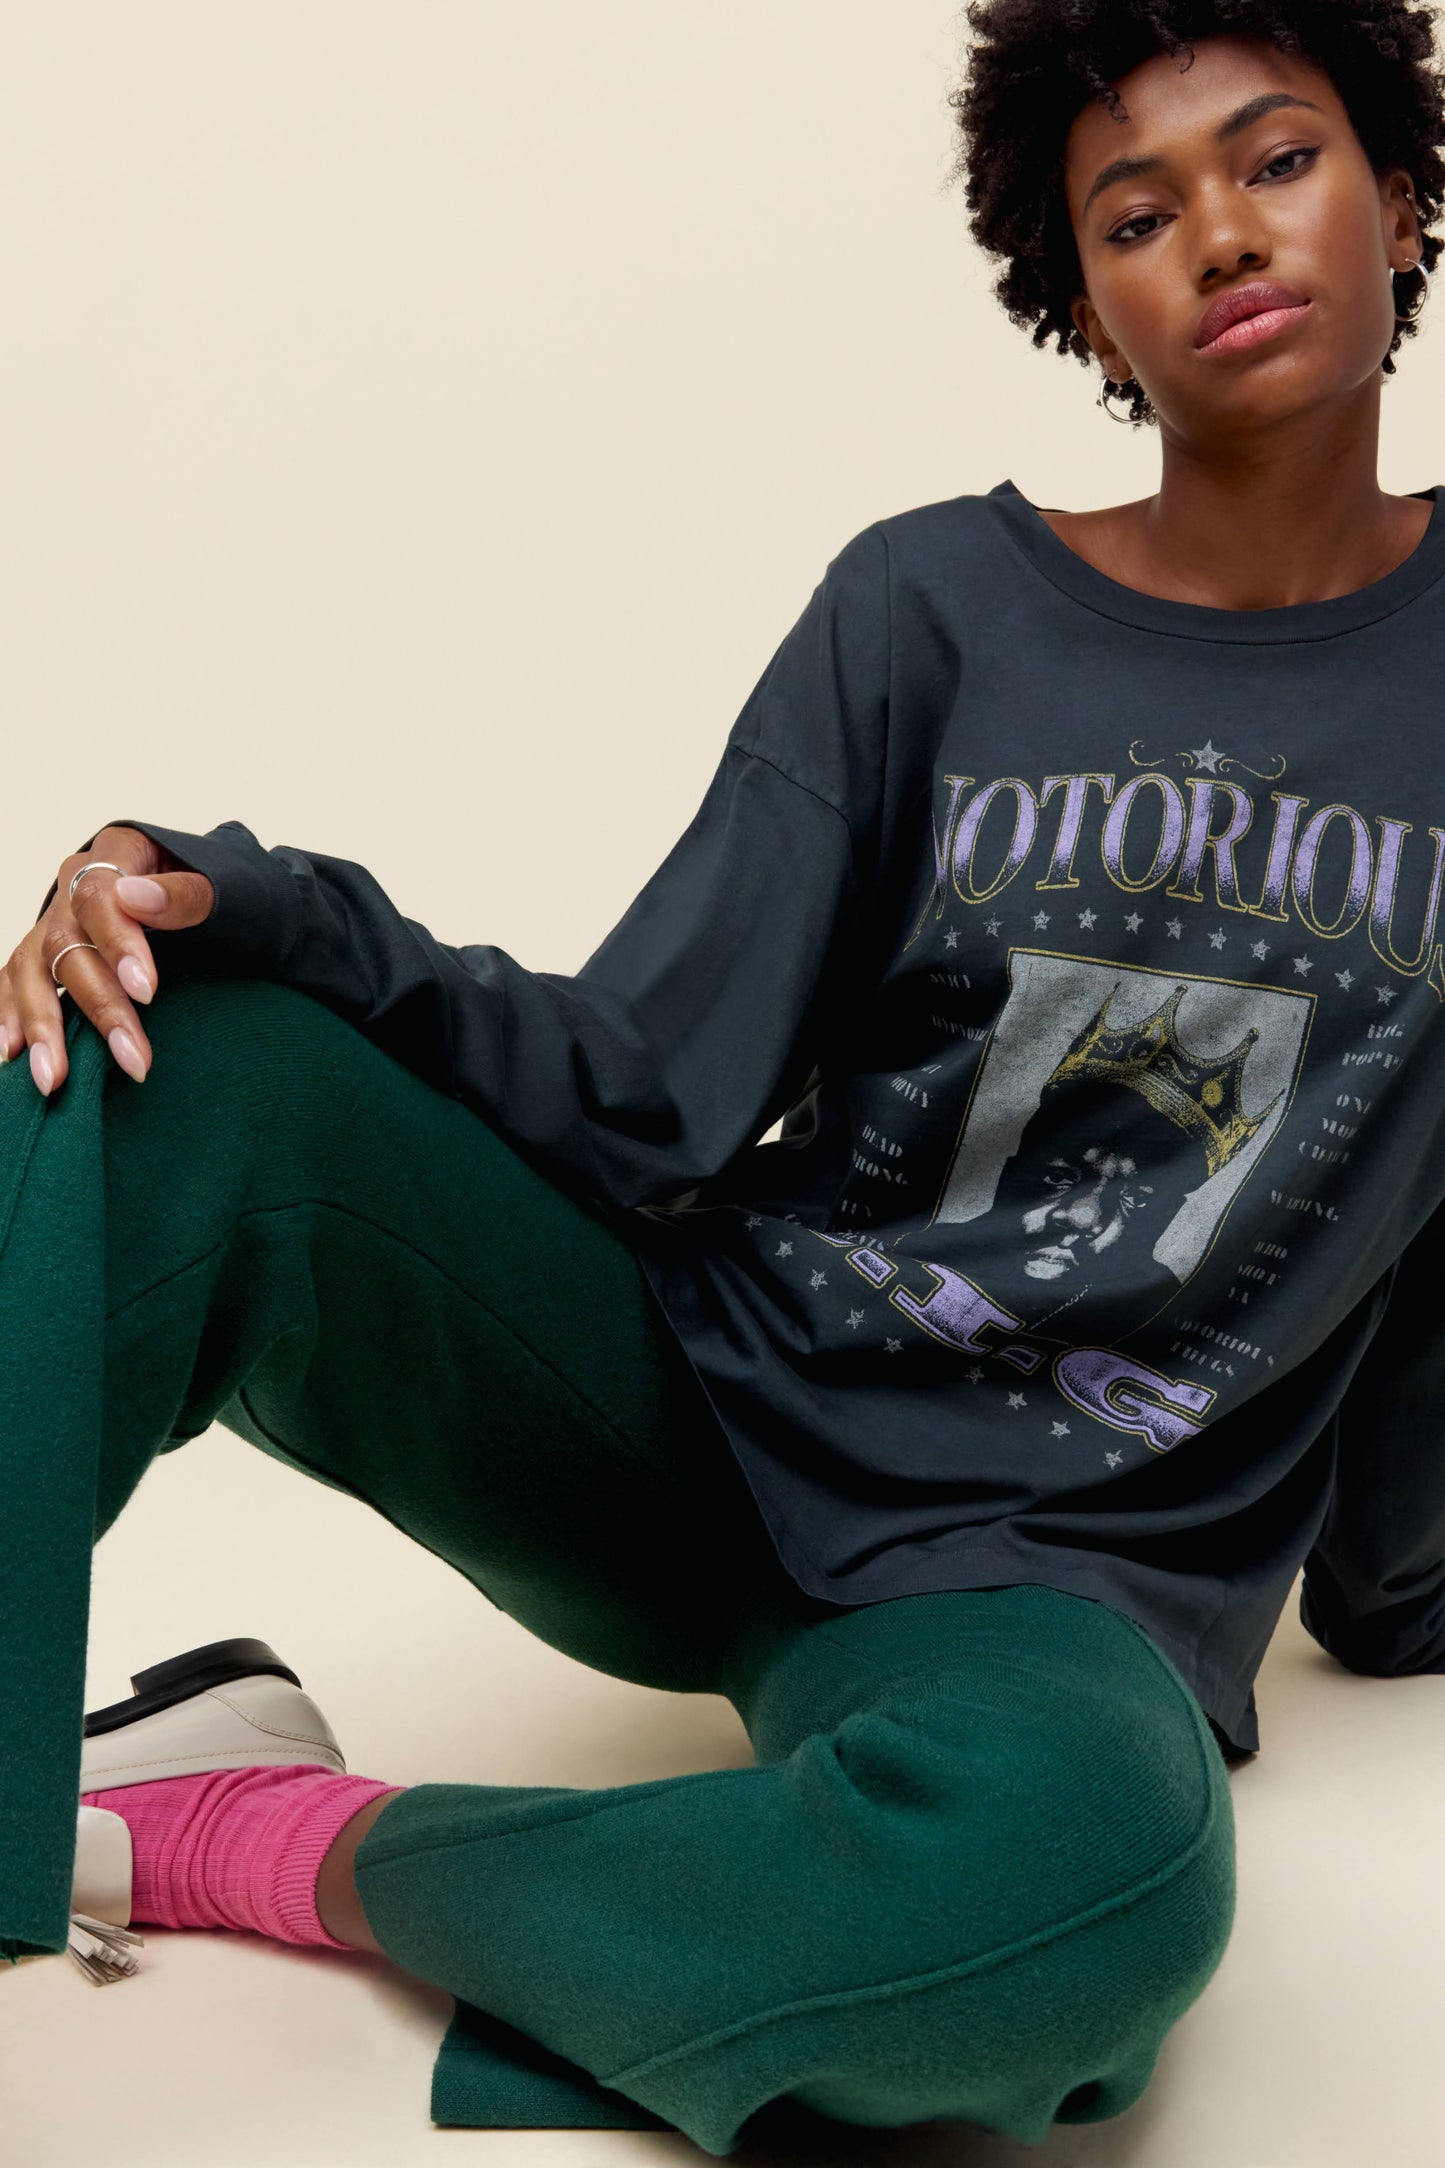 A model featuring a black long sleeve stamped with Notorious and a portrait of the artist itself.